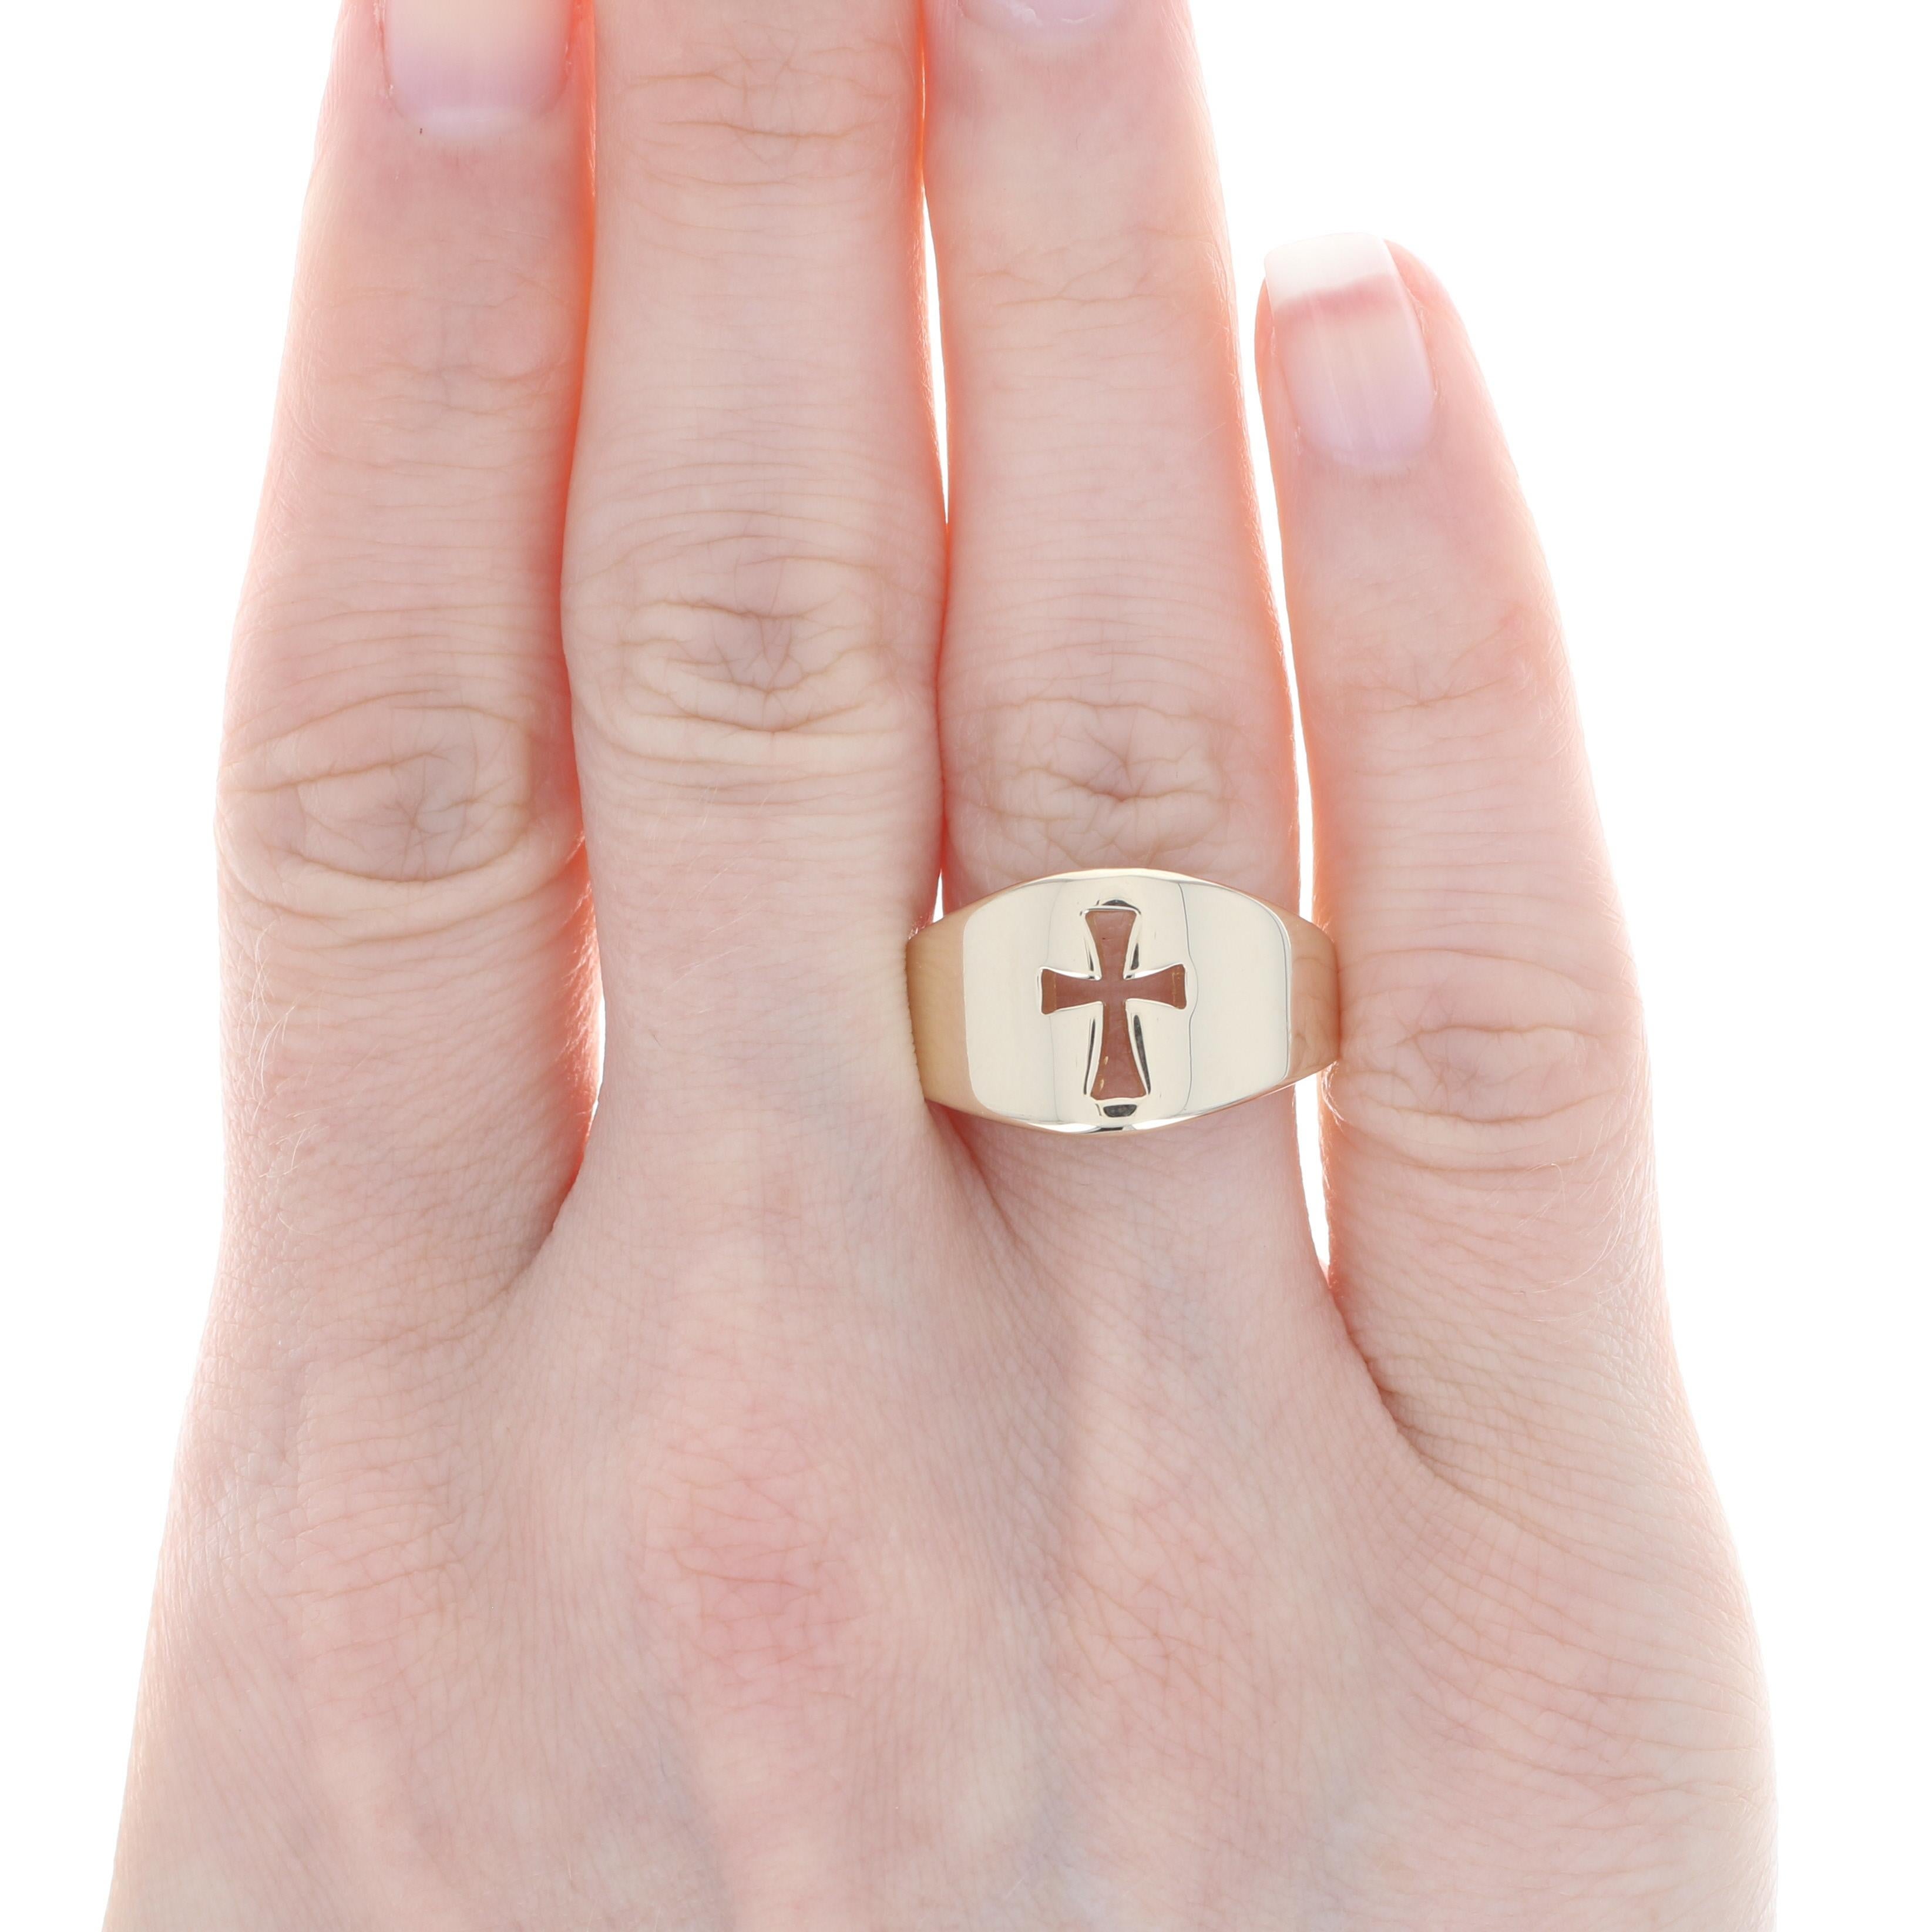 James Avery | Jewelry | James Avery Retired Sterling Twisted Wire Cross Ring  Size 55 | Poshmark